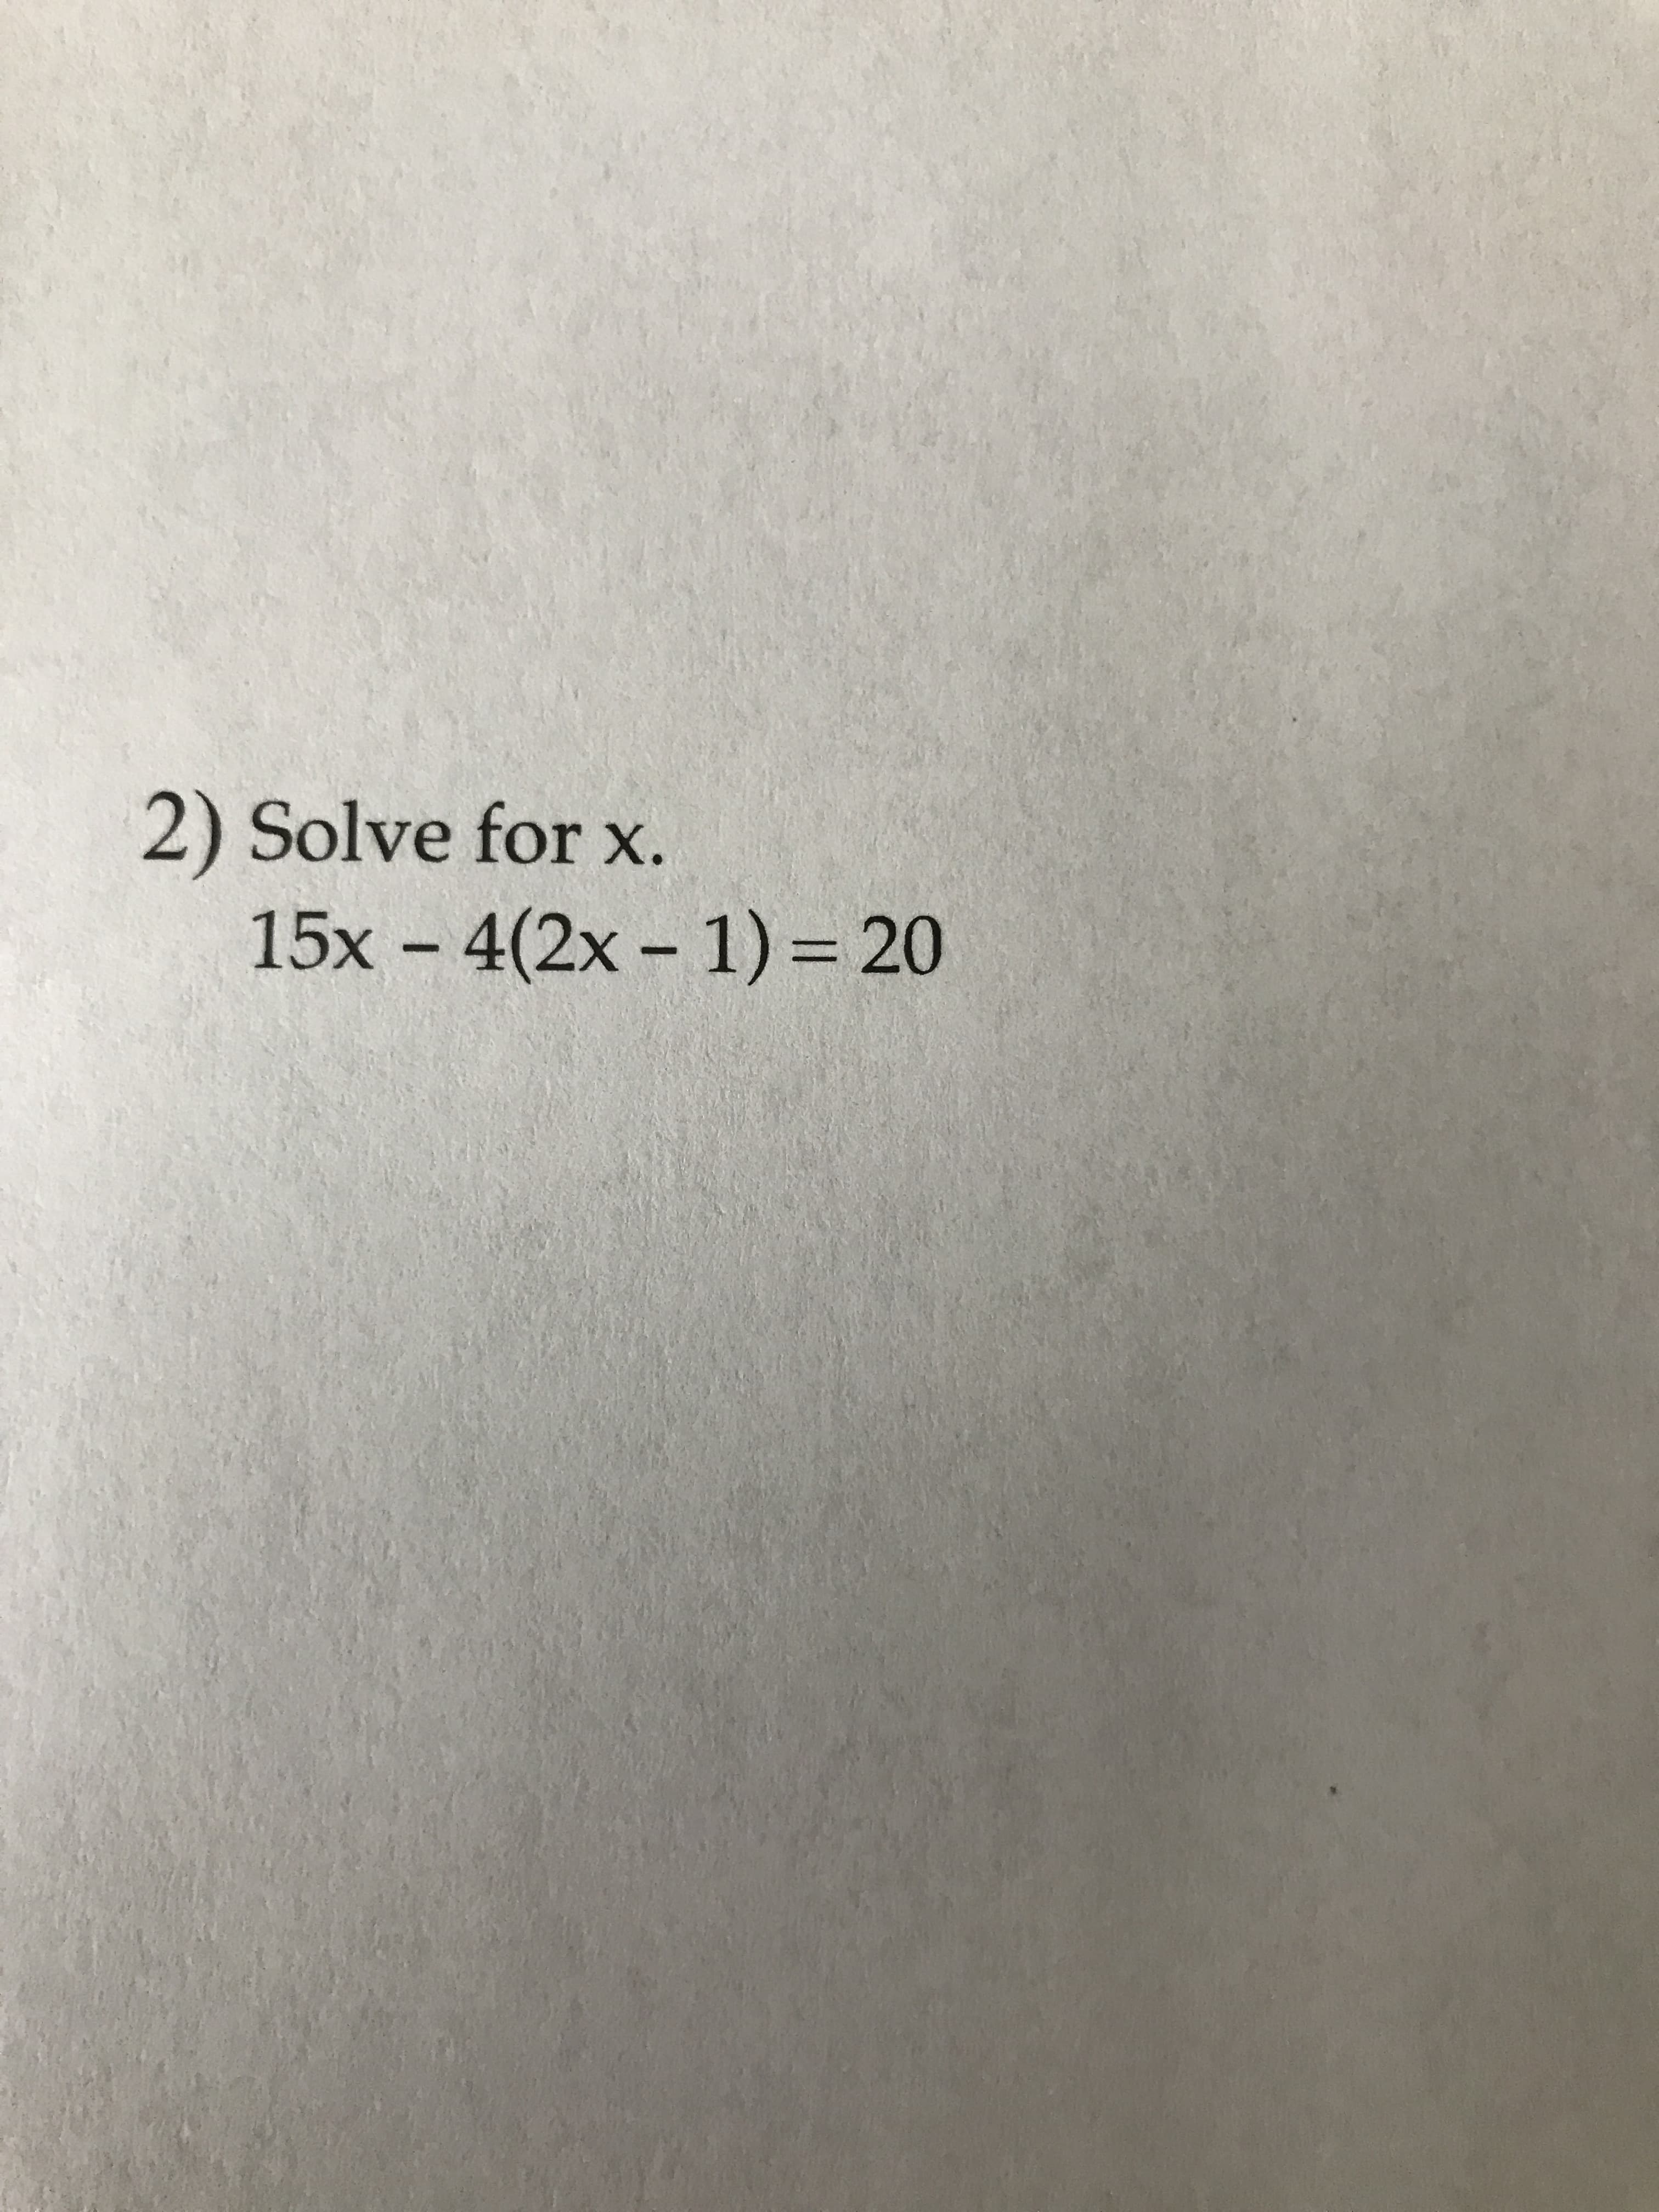 2) Solve for x.
15x - 4(2x - 1)= 20
